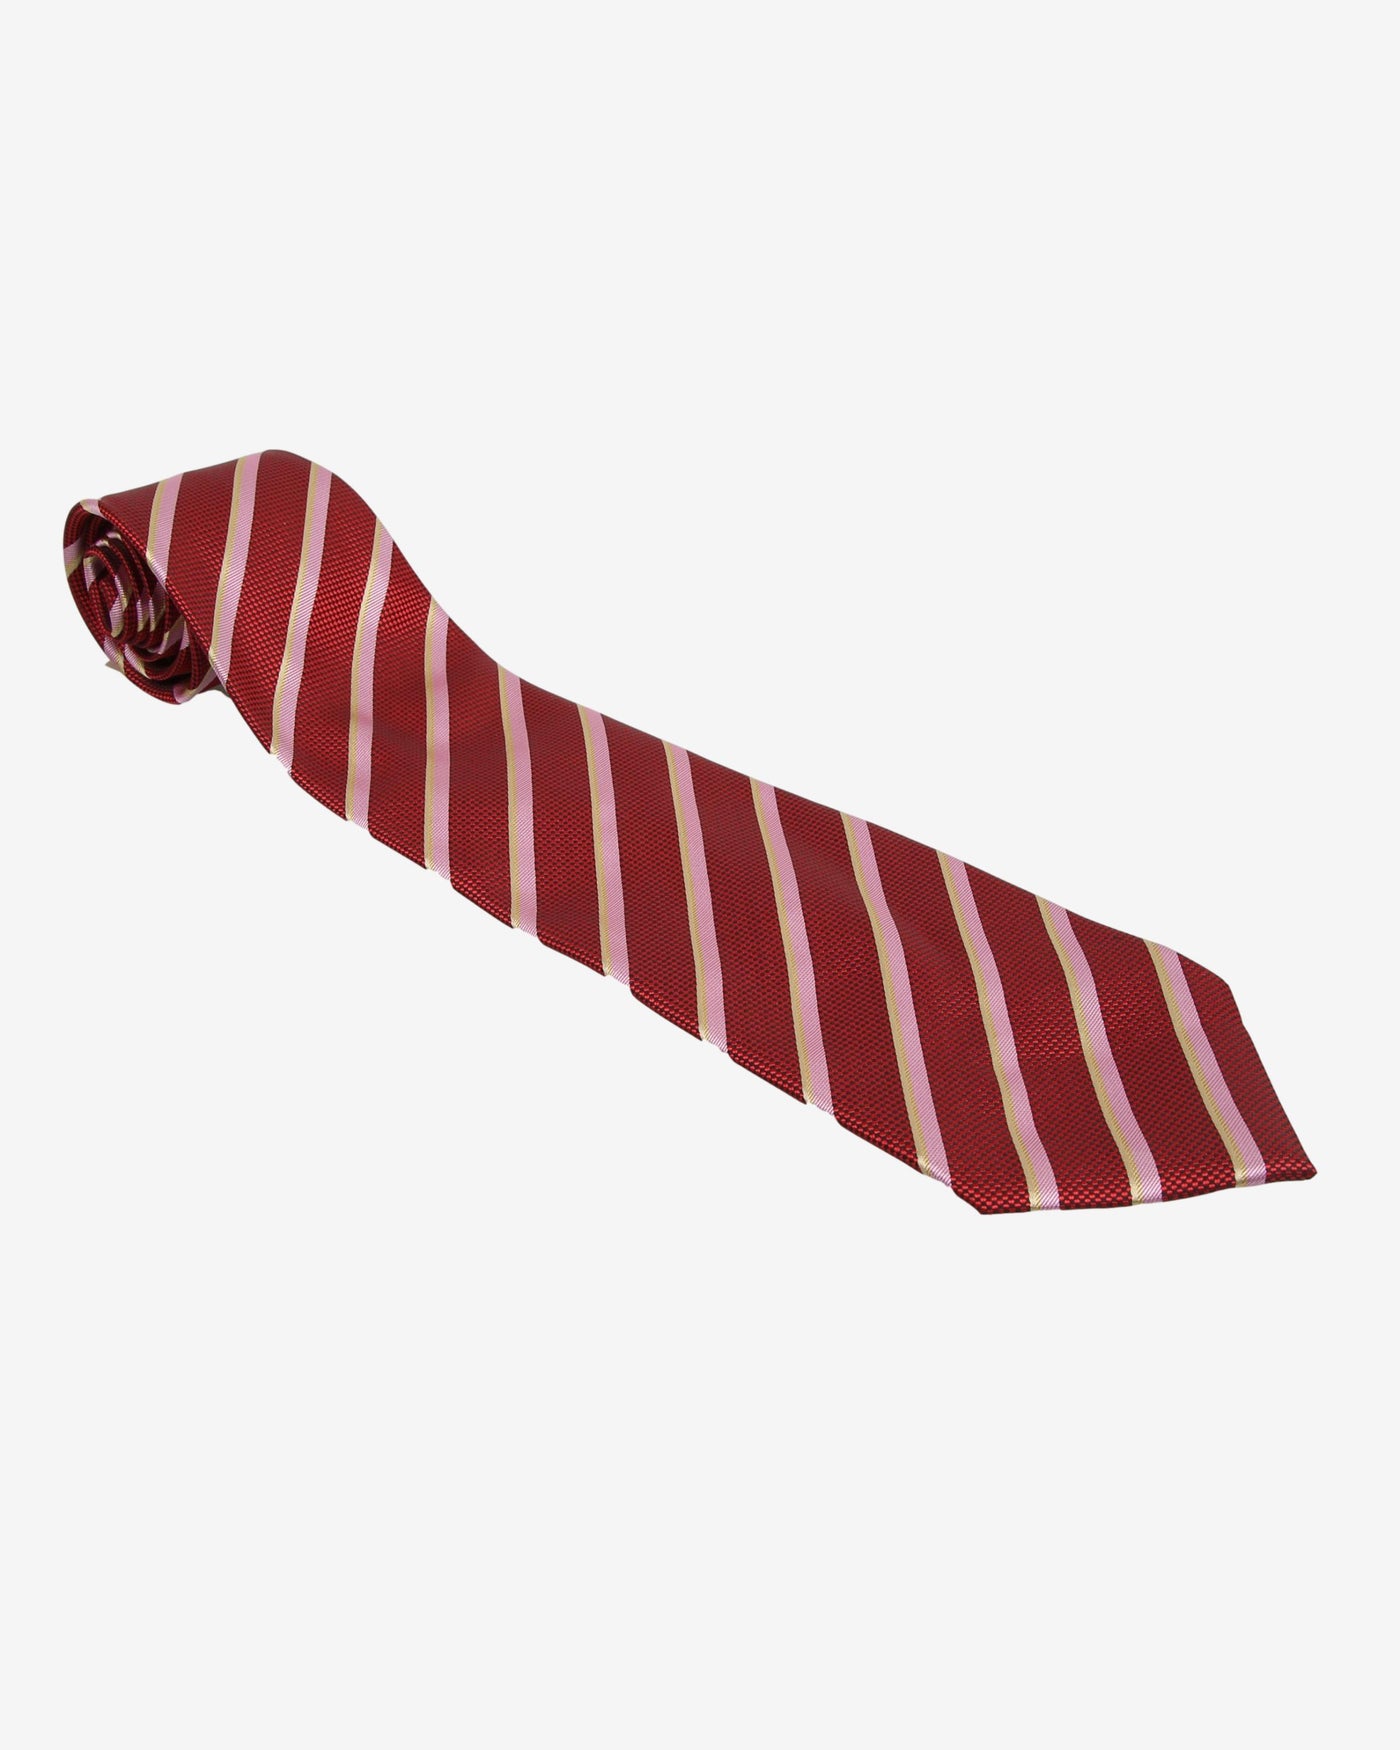 Armani Red / Gold Stripe Patterned Tie